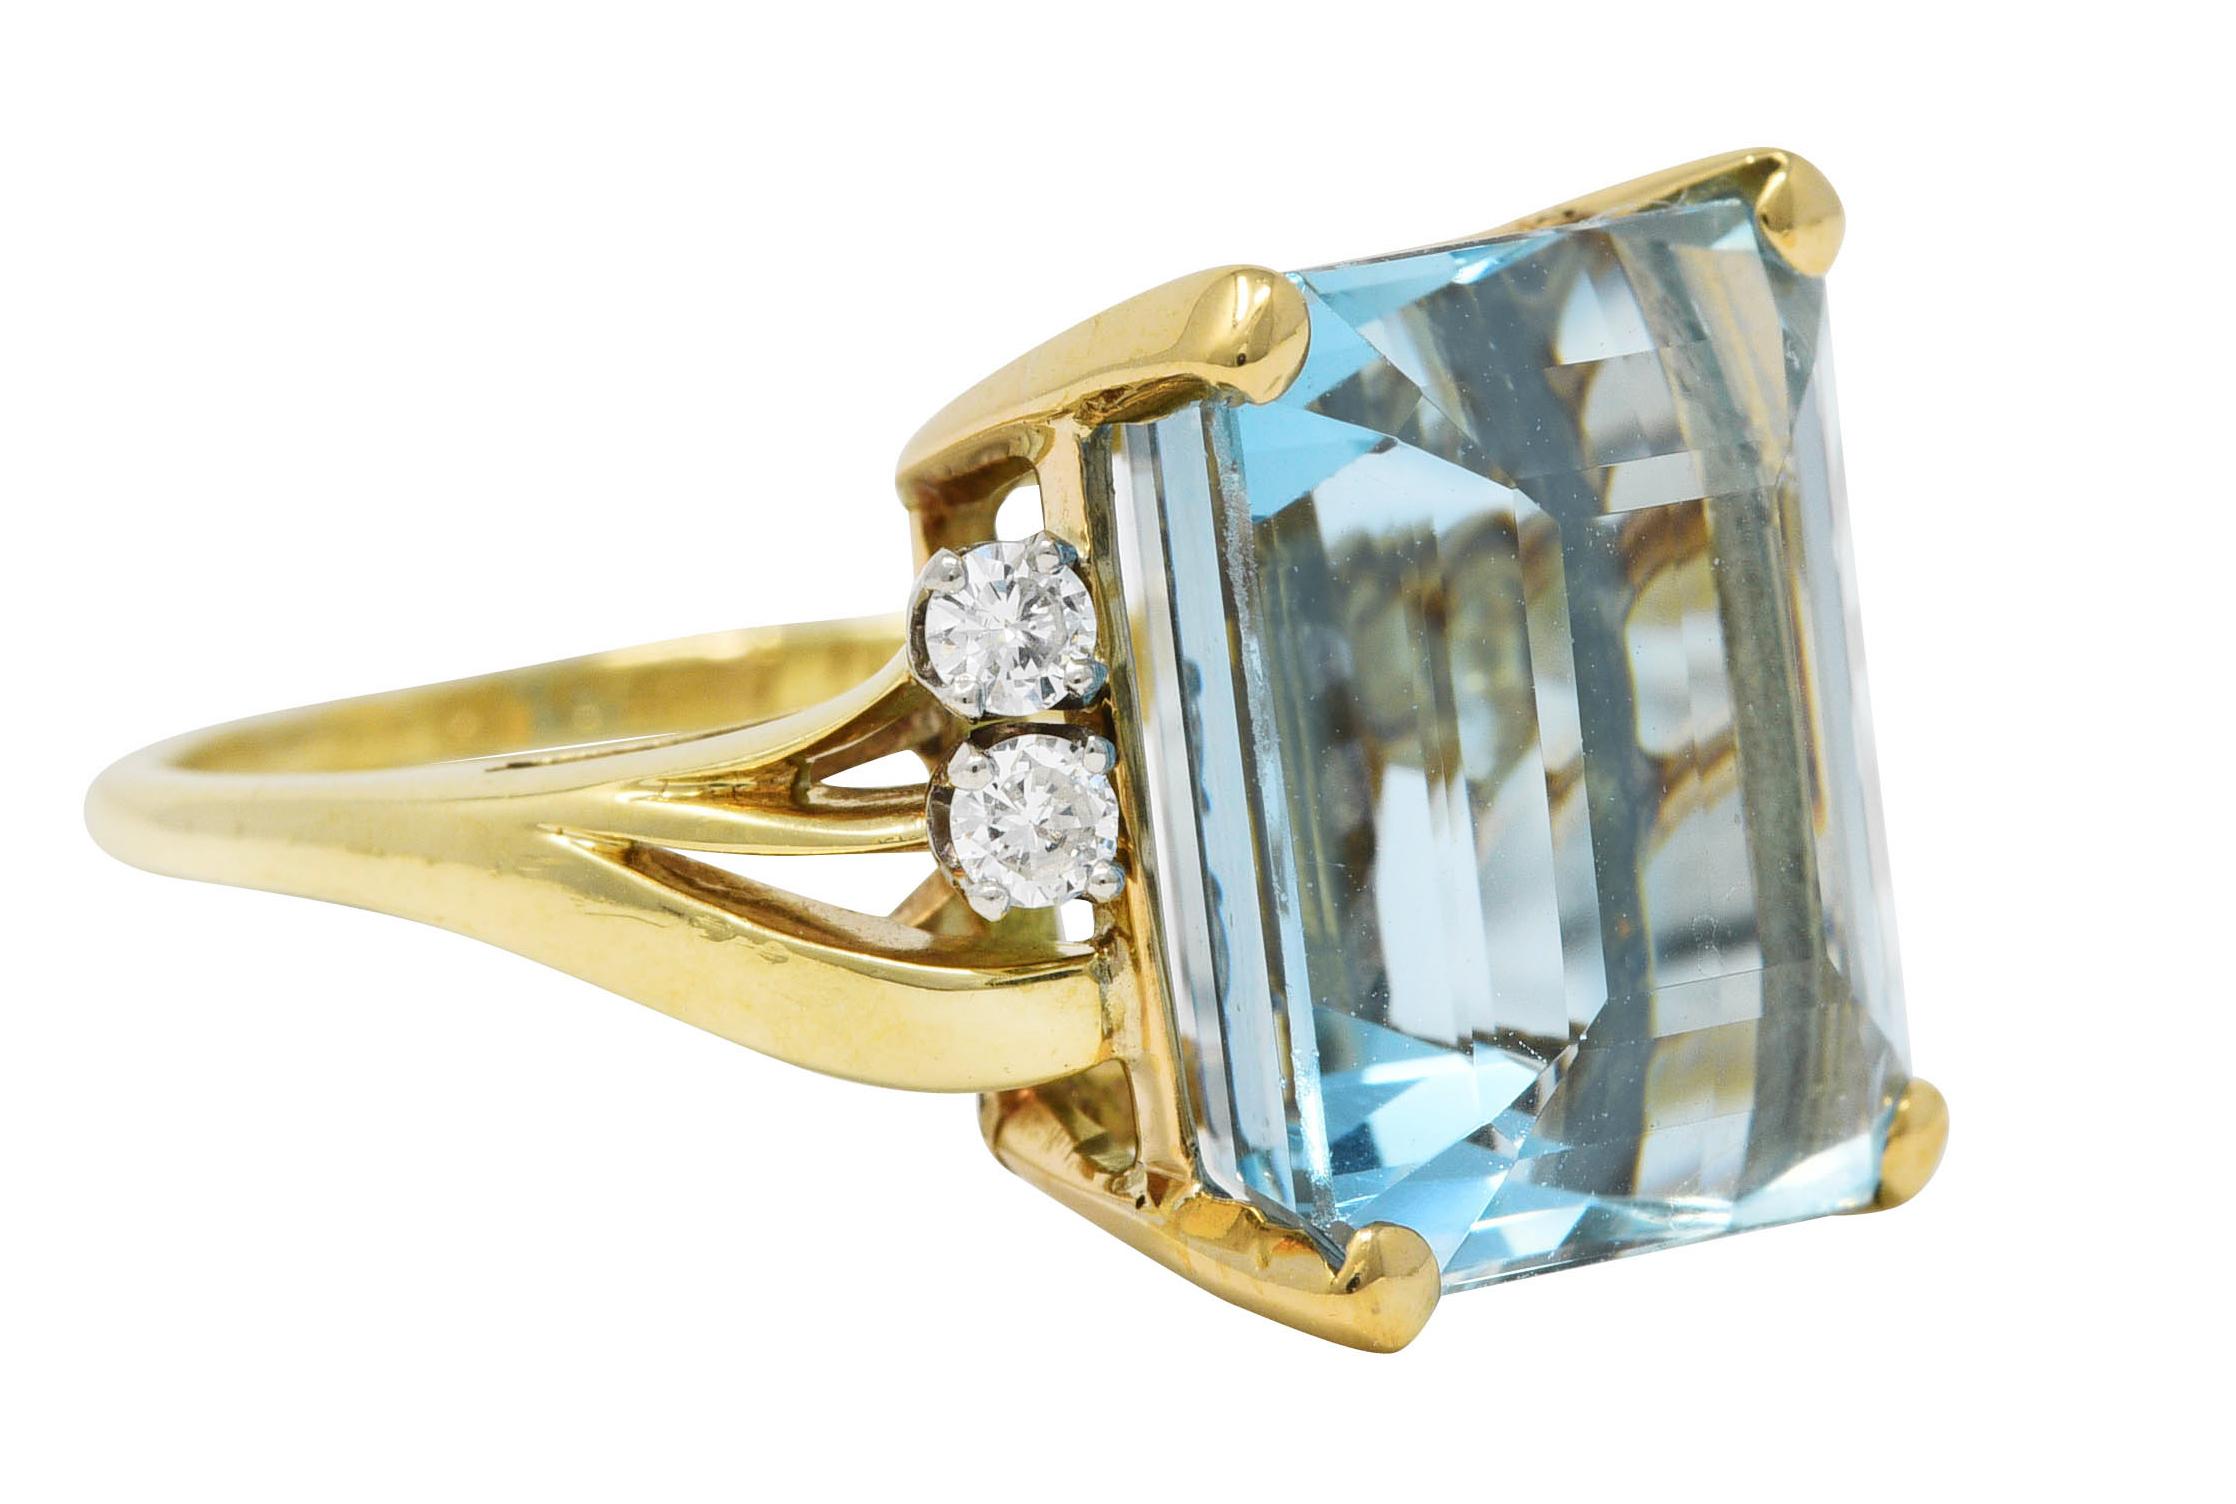 Featuring an emerald cut aquamarine weighing approximately 10.00 carats. Eye clean with medium greenish blue color. Basket set and flanked by torqued tri-split shoulders. Accented by round brilliant cut diamonds weighing in total approximately 0.15